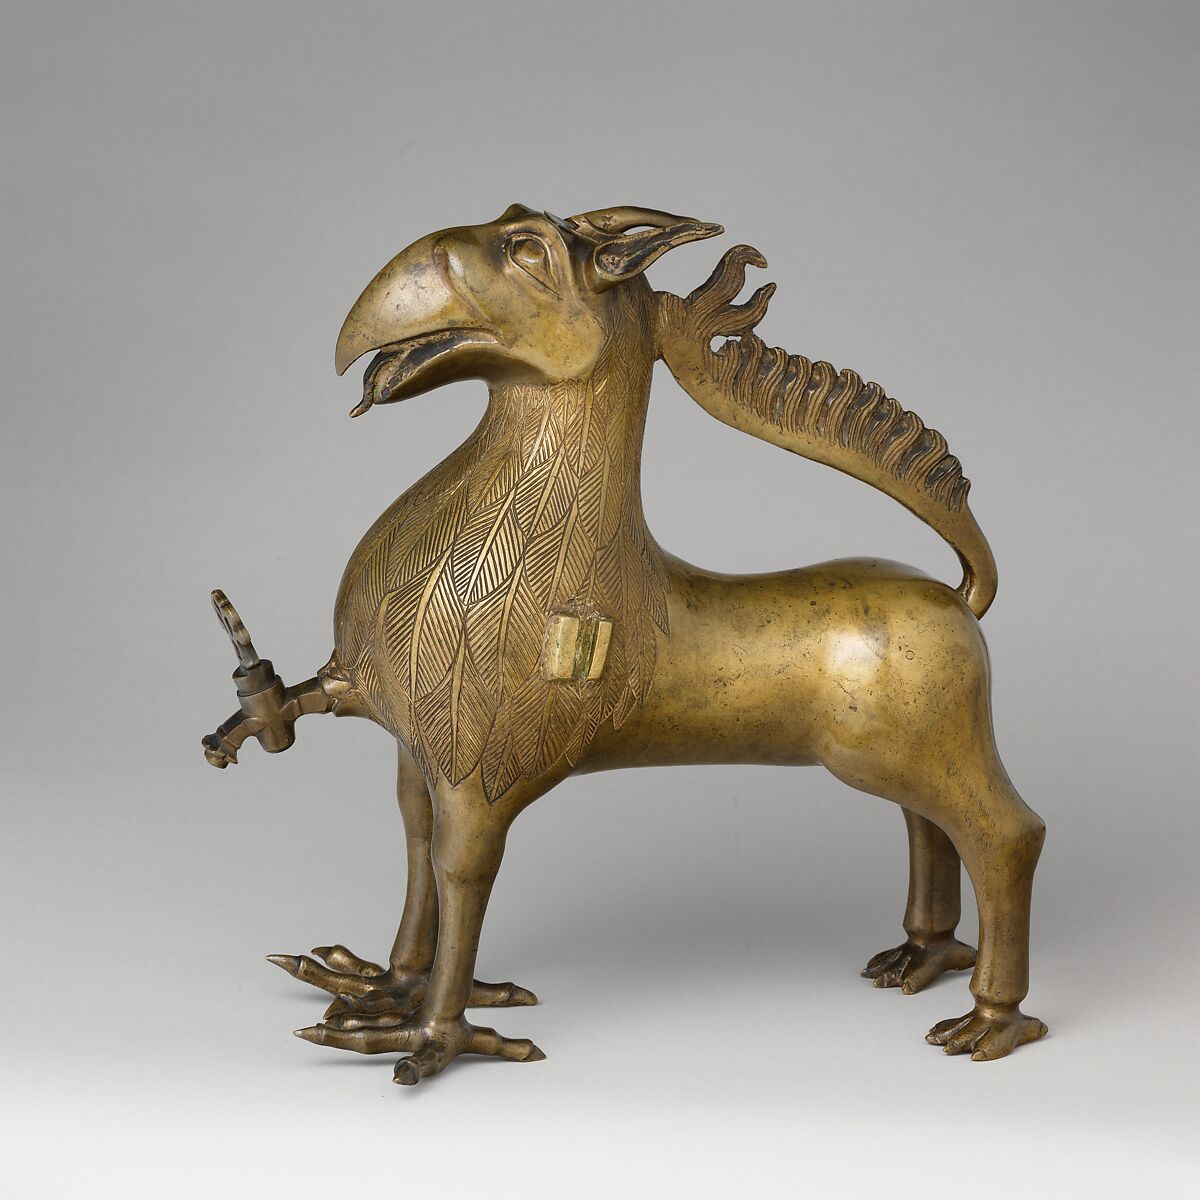 Aquamanile in the Form of a Griffin